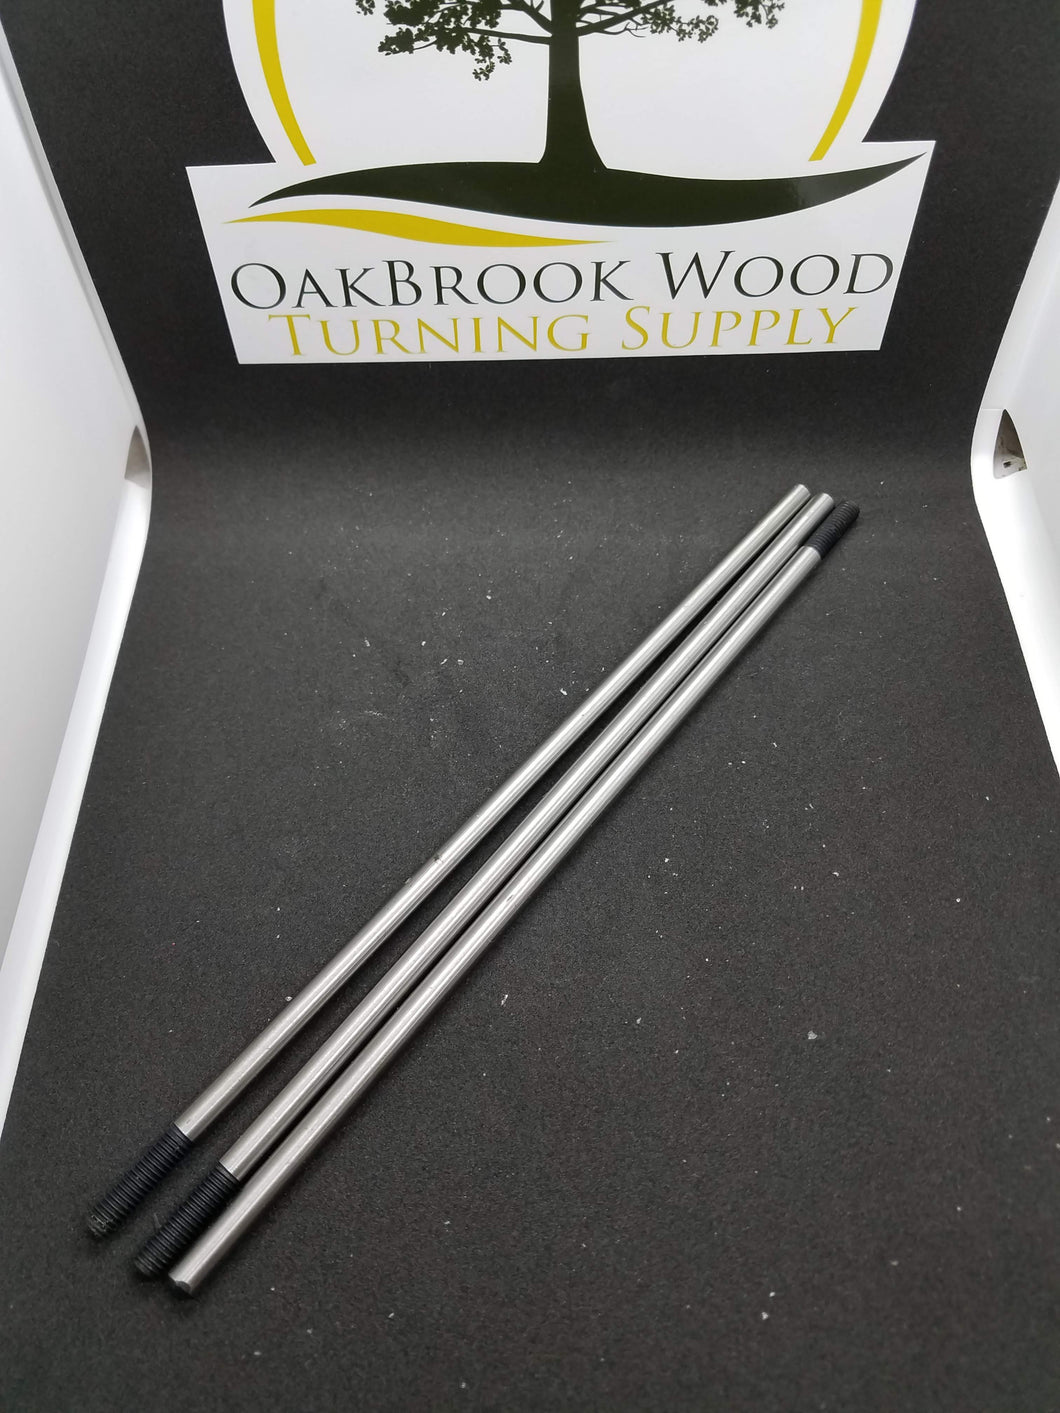 Replacement Pen mandrel rod - Oakbrook Wood Turning Supply